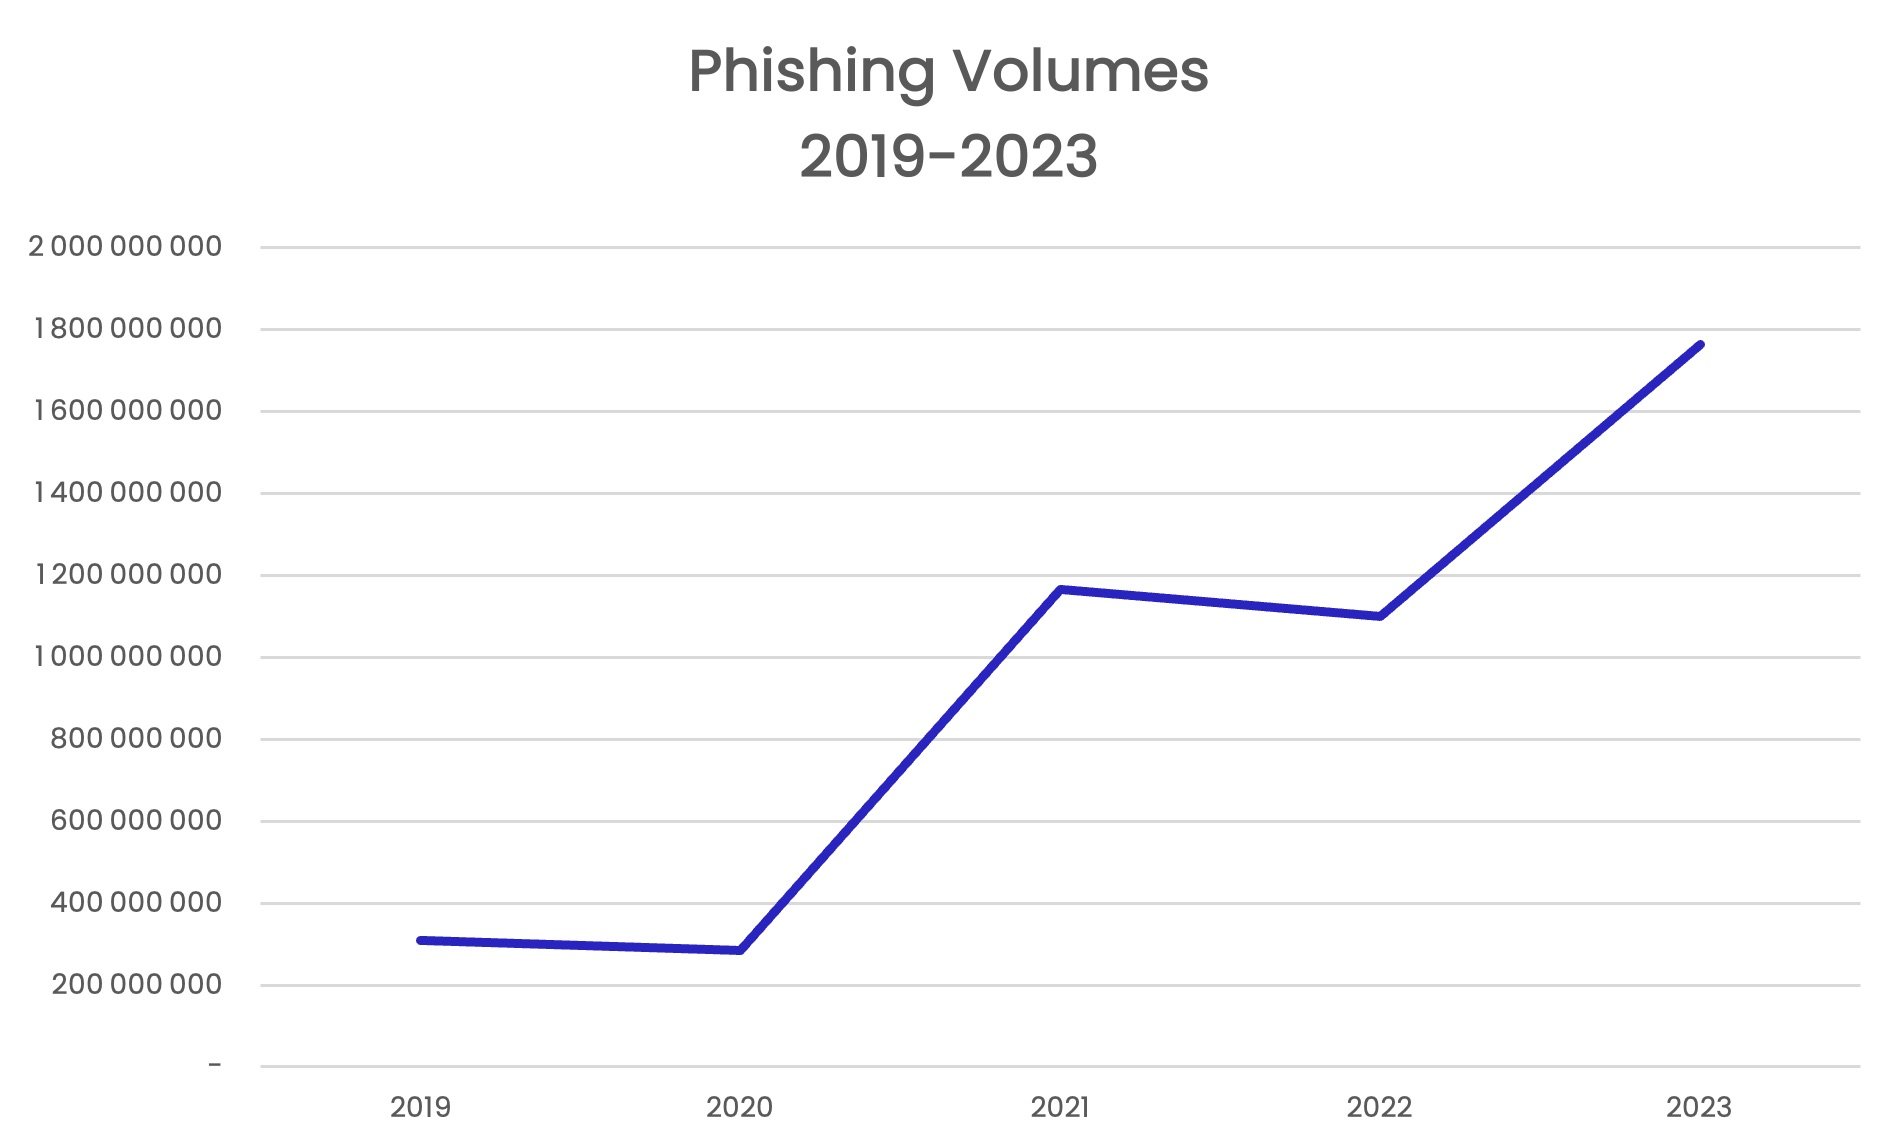 Phishing emails detected by Vade since 2019